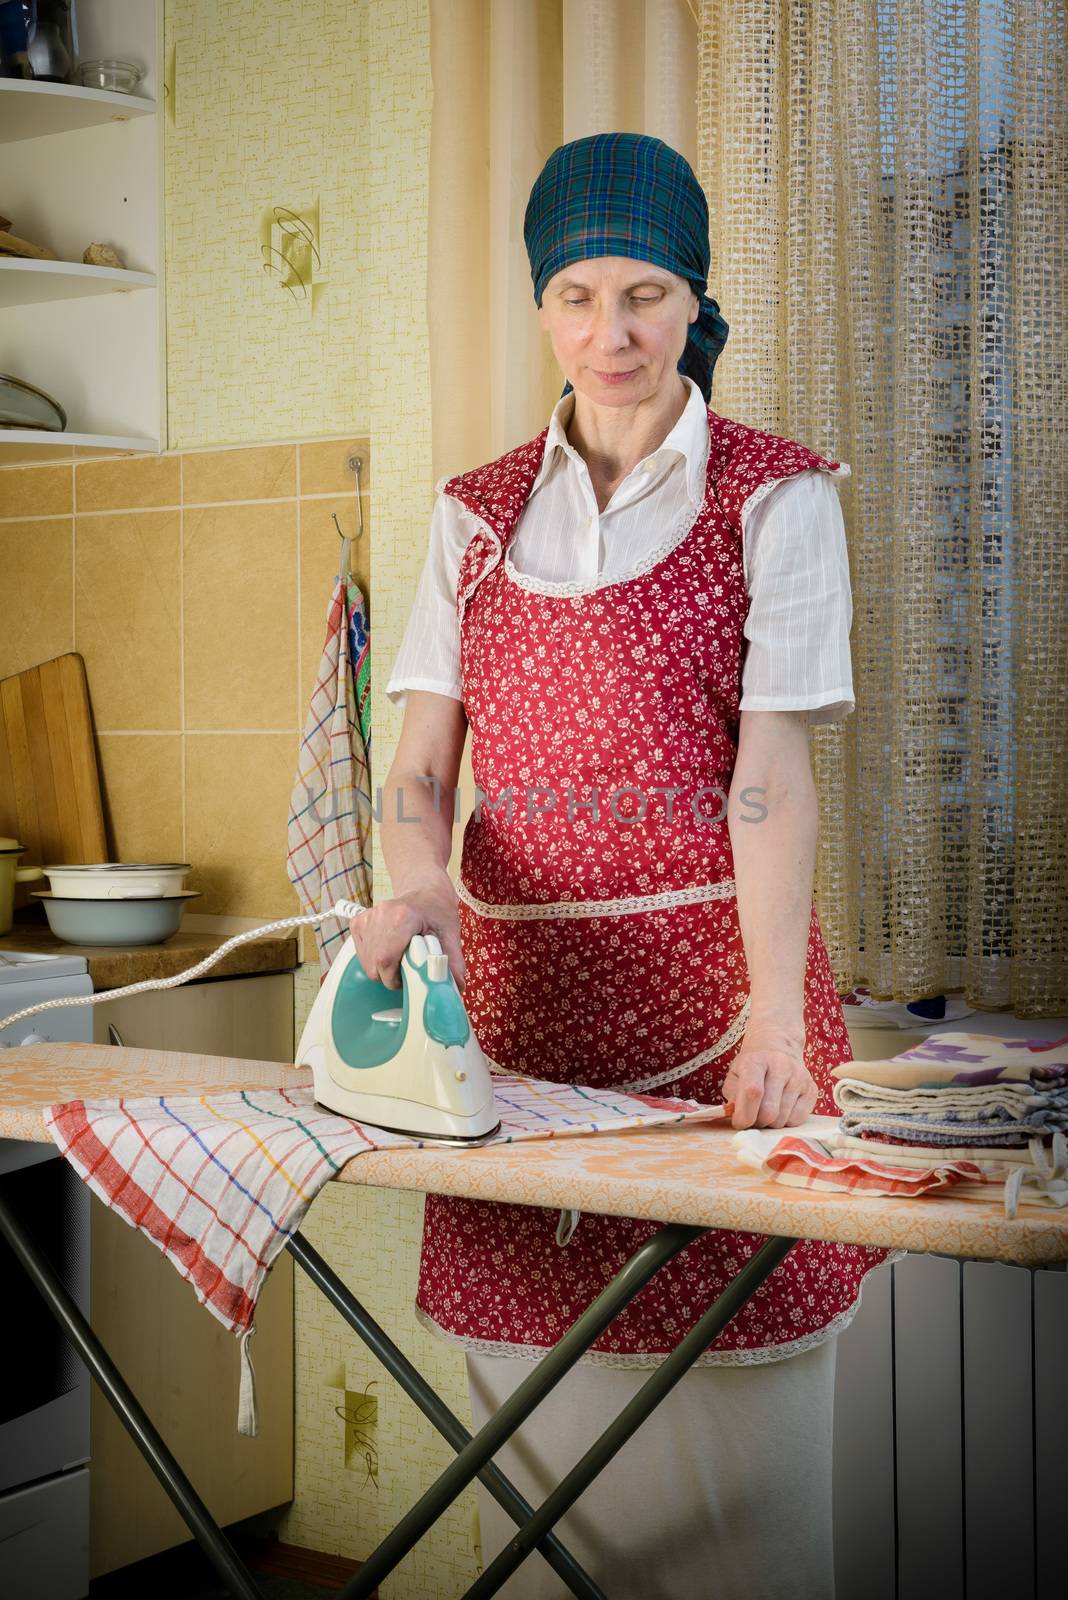 Woman Ironing in the Kitchen by MaxalTamor